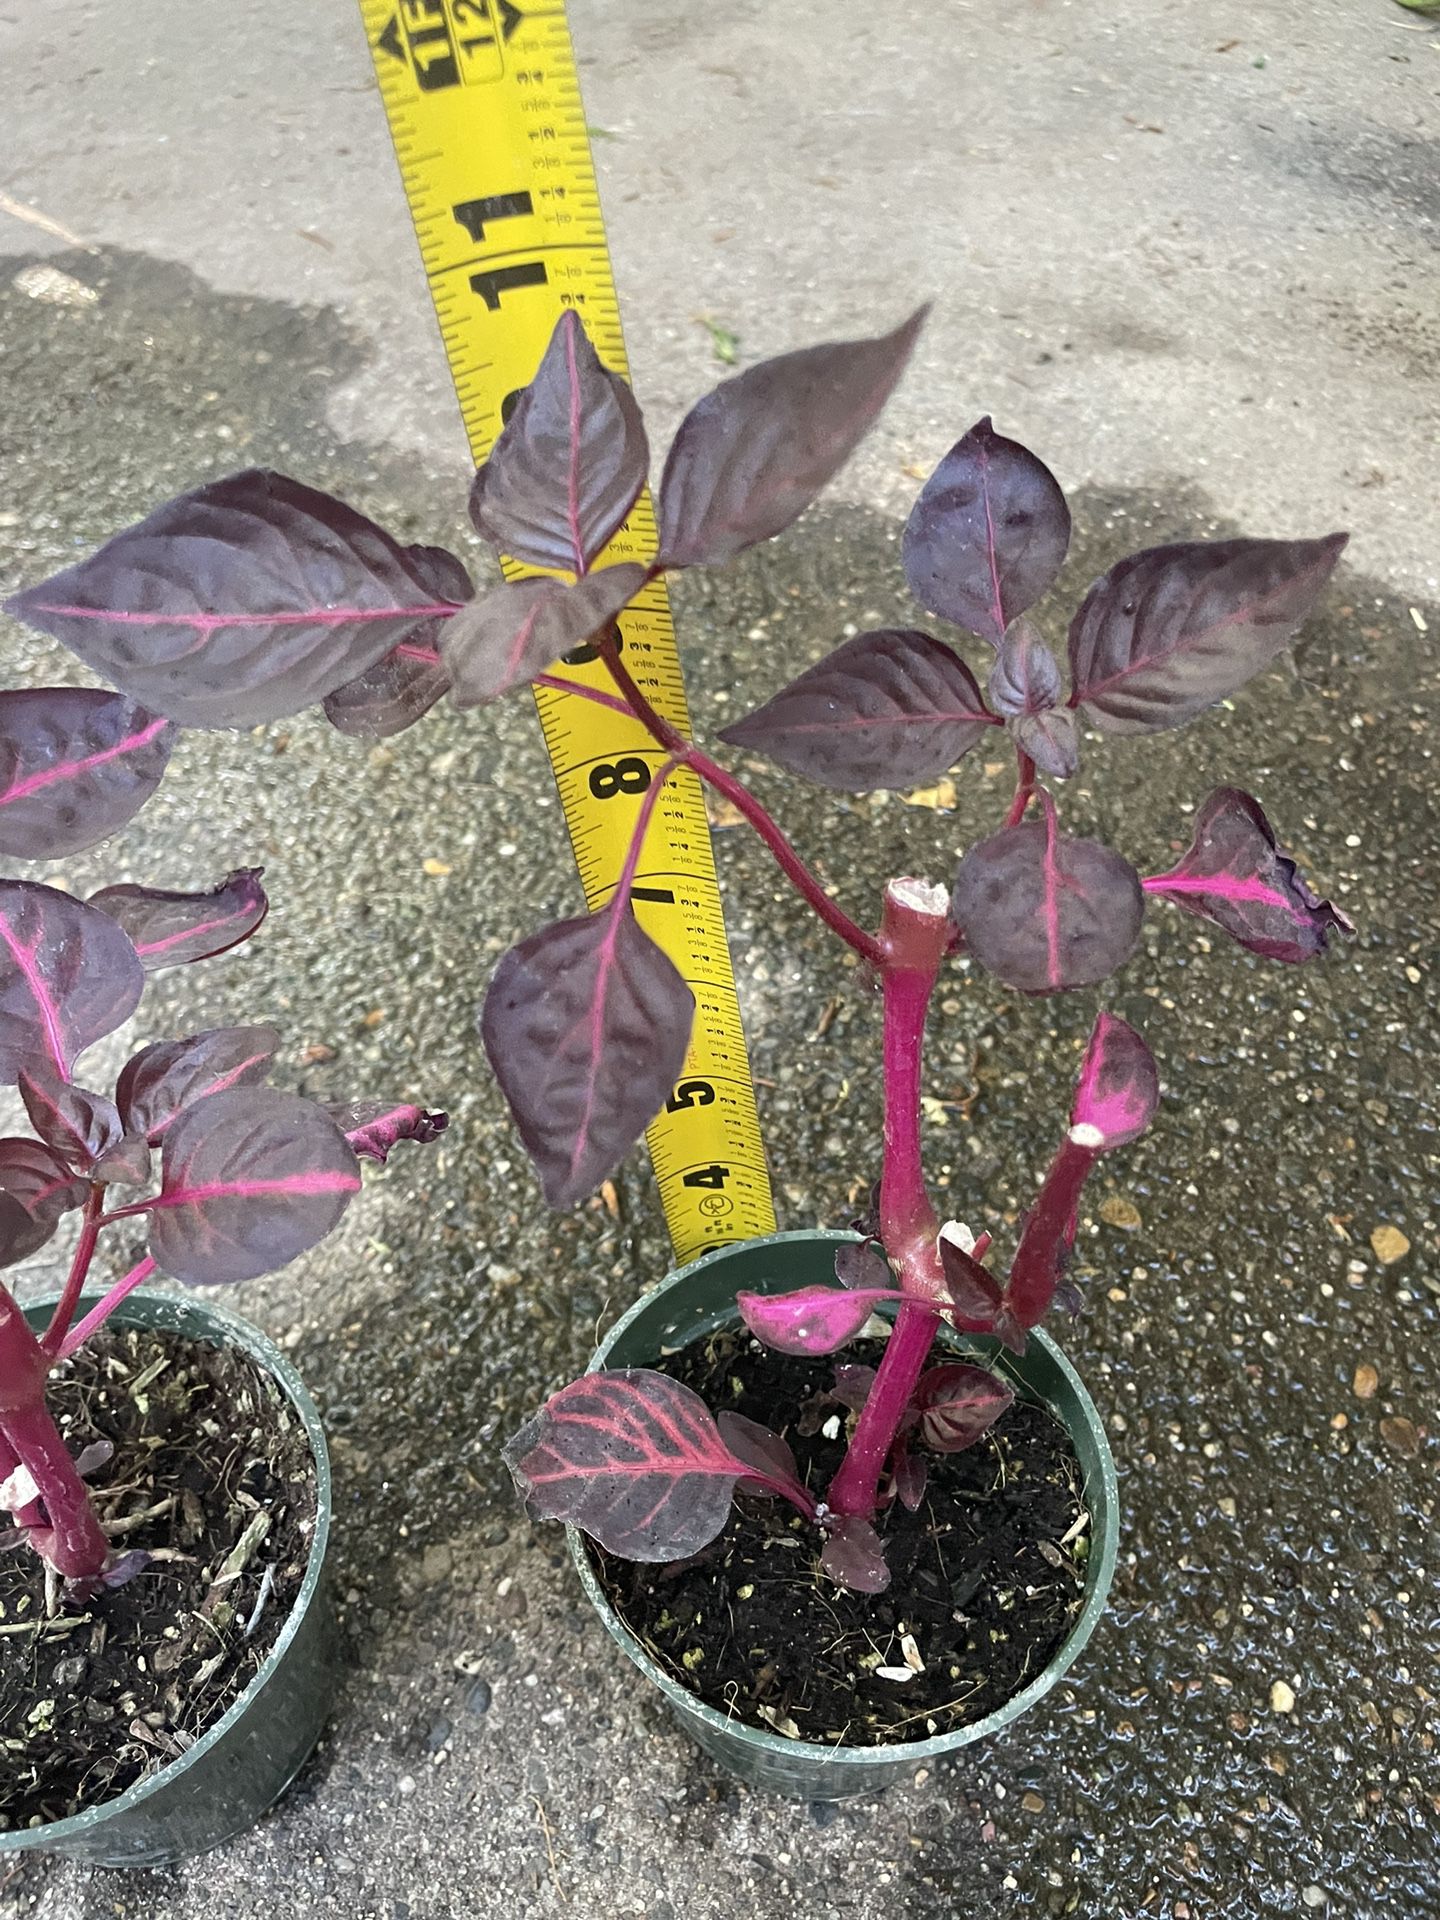 Blood Leaf Plant (Iresine) 4” pot $13 each or both for $24; 95820 Price Firm